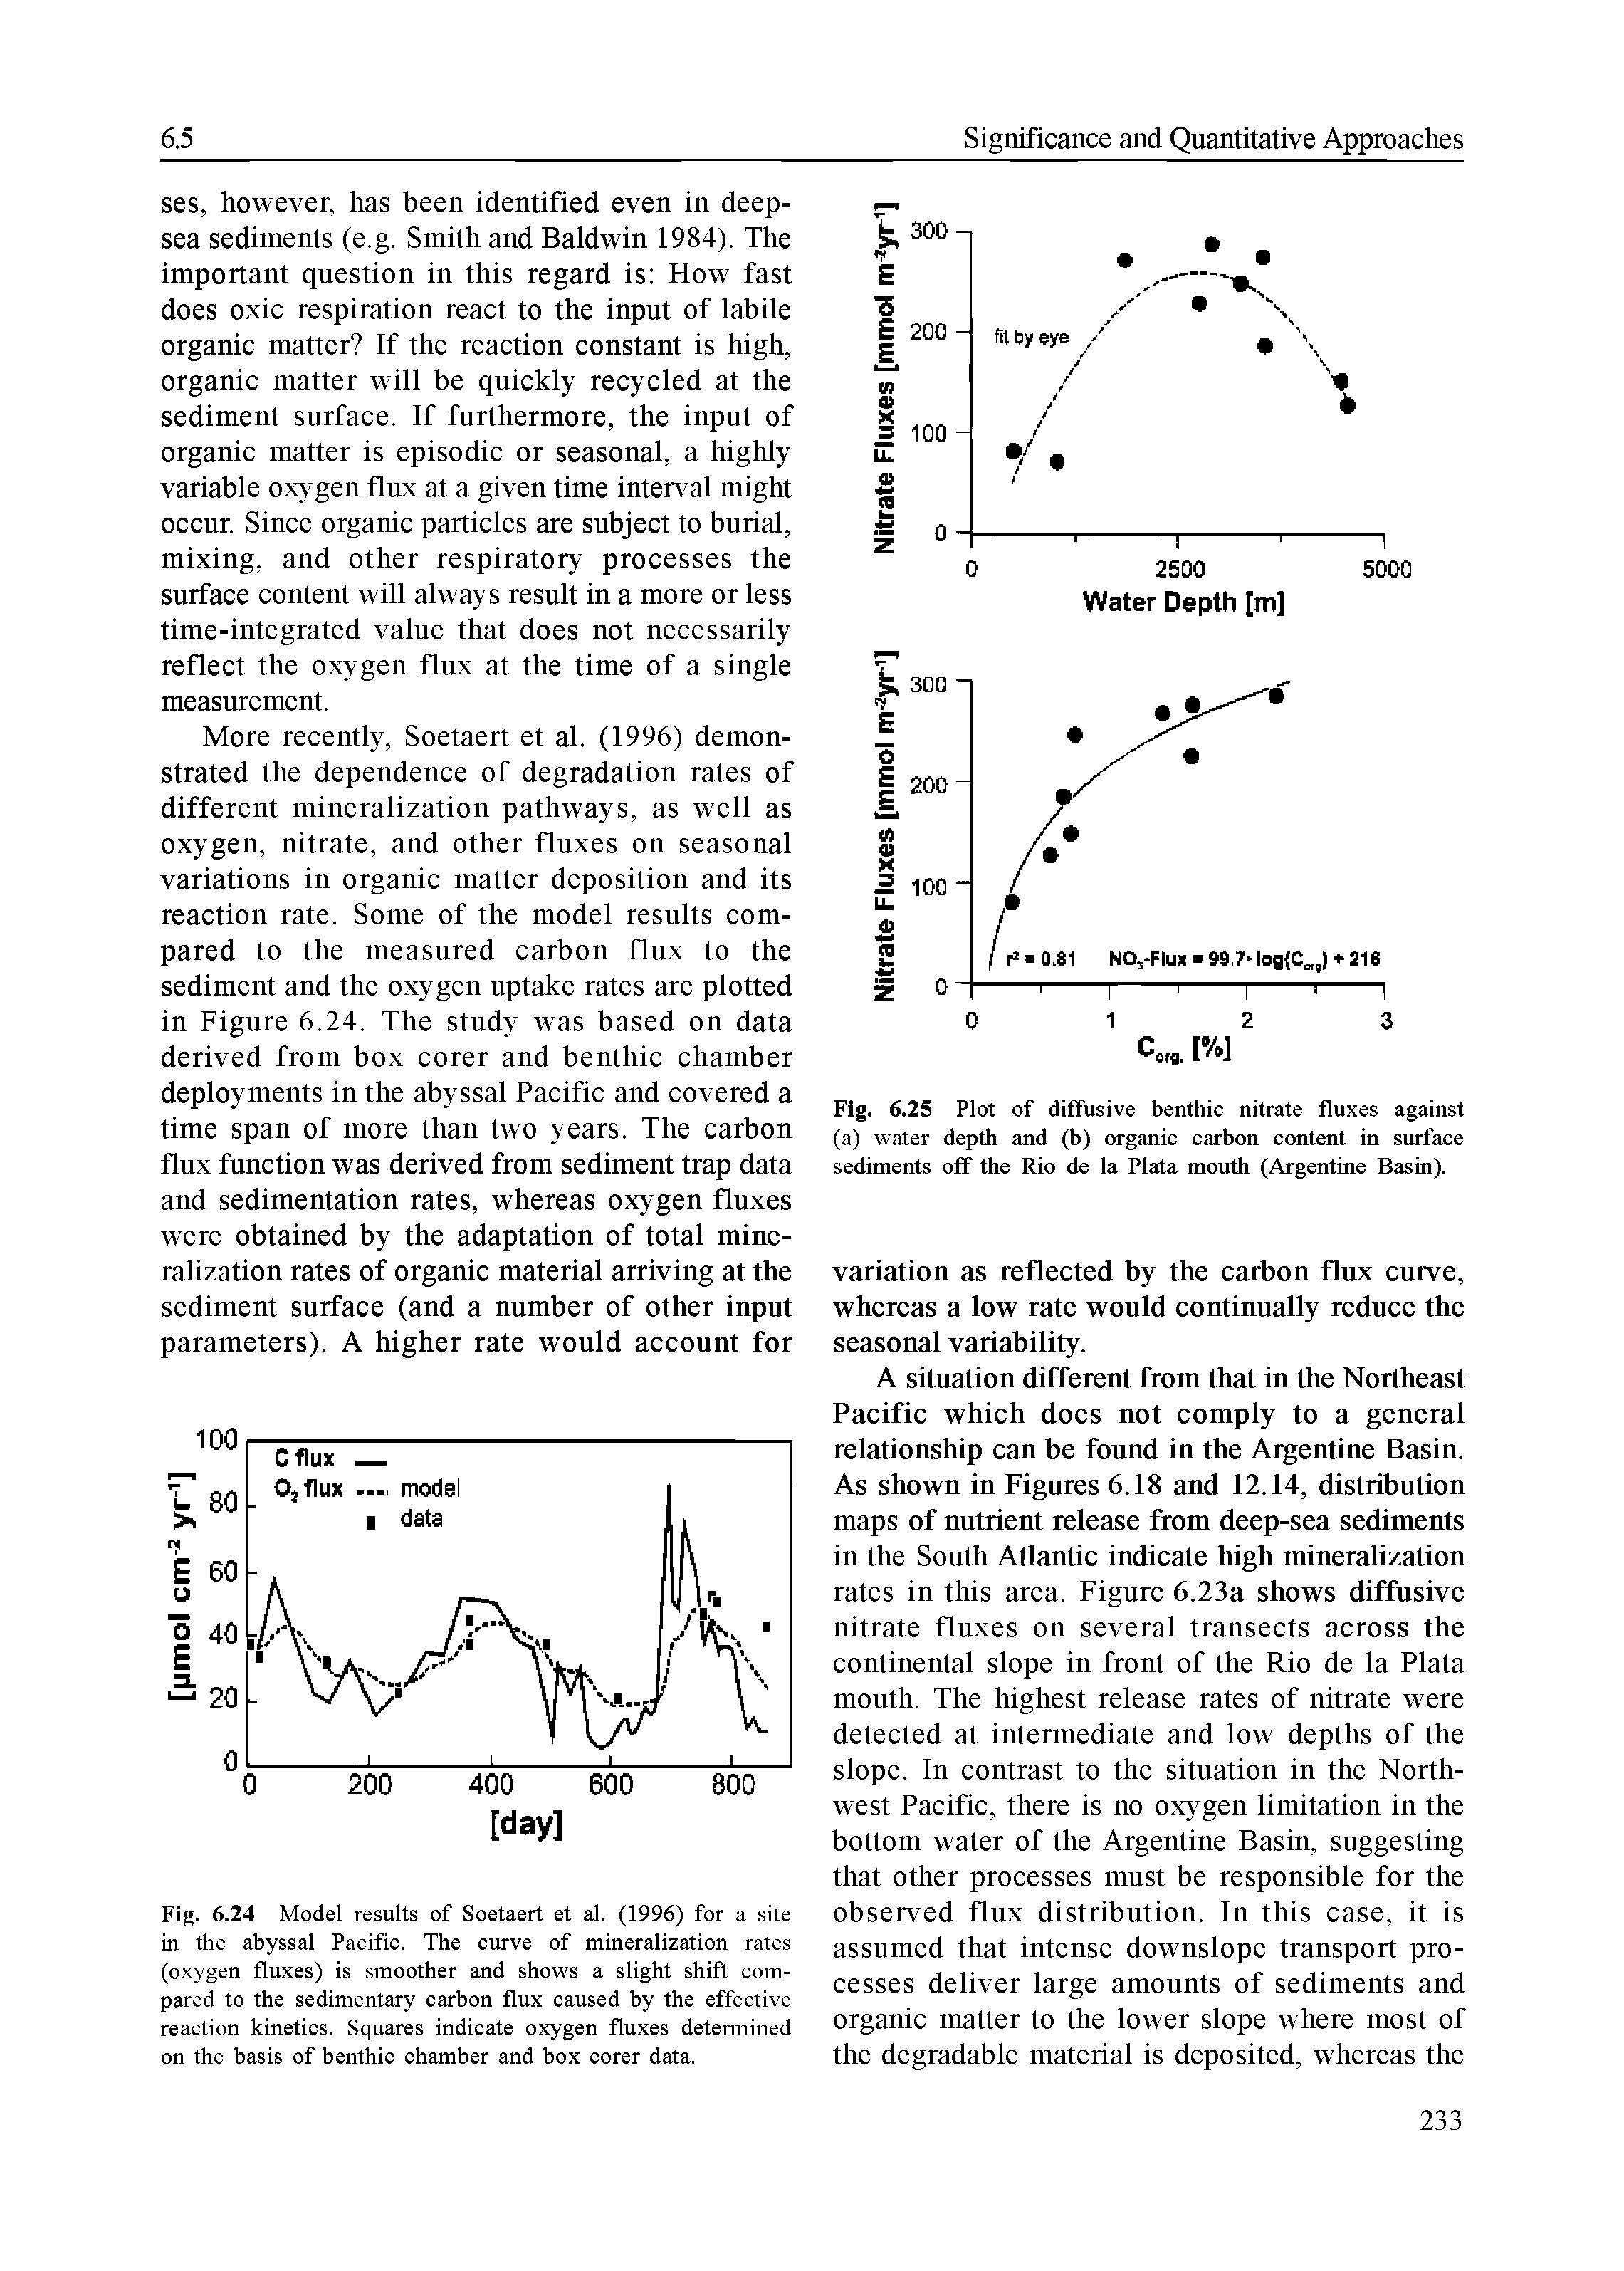 Fig. 6.24 Model results of Soetaert et al. (1996) for a site in the abyssal Pacific. The curve of mineralization rates (oxygen fluxes) is smoother and shows a slight shift compared to the sedimentary carbon flux caused by the effective reaction kinetics. Squares indicate oxygen fluxes determined on the basis of benthic chamber and box corer data.